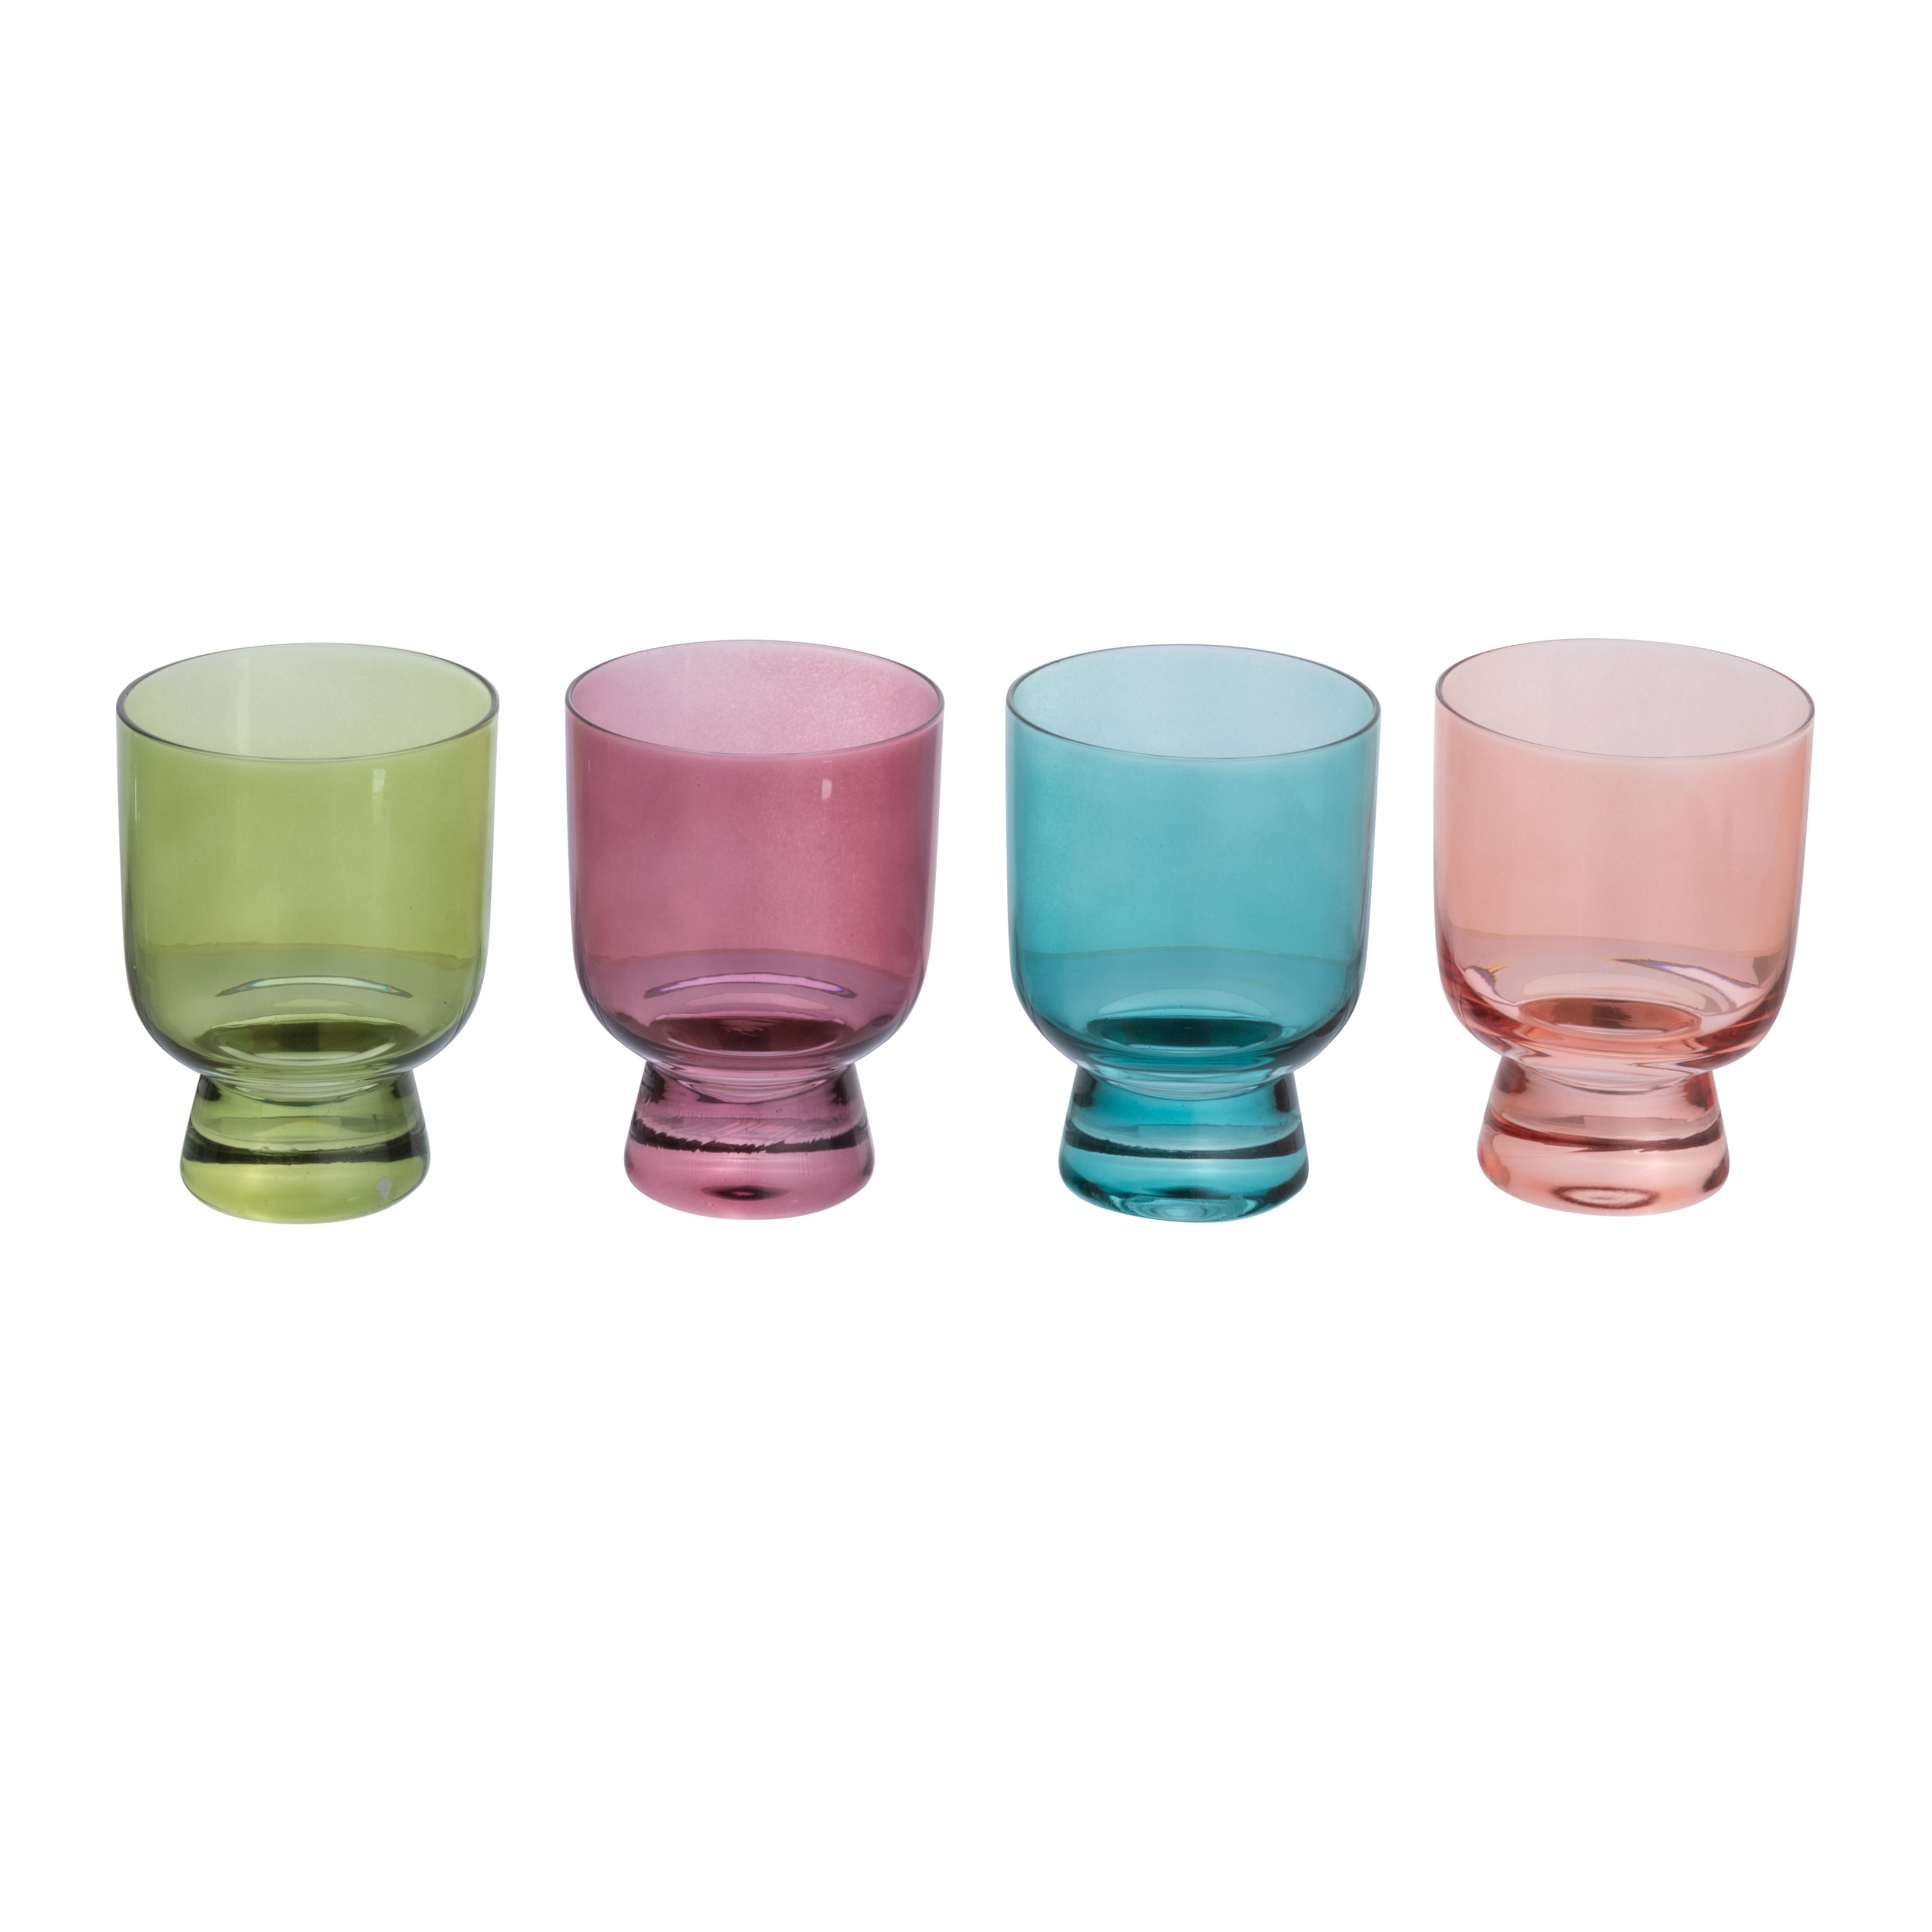 6oz. Hand Blown Footed Drinking Glasses Set